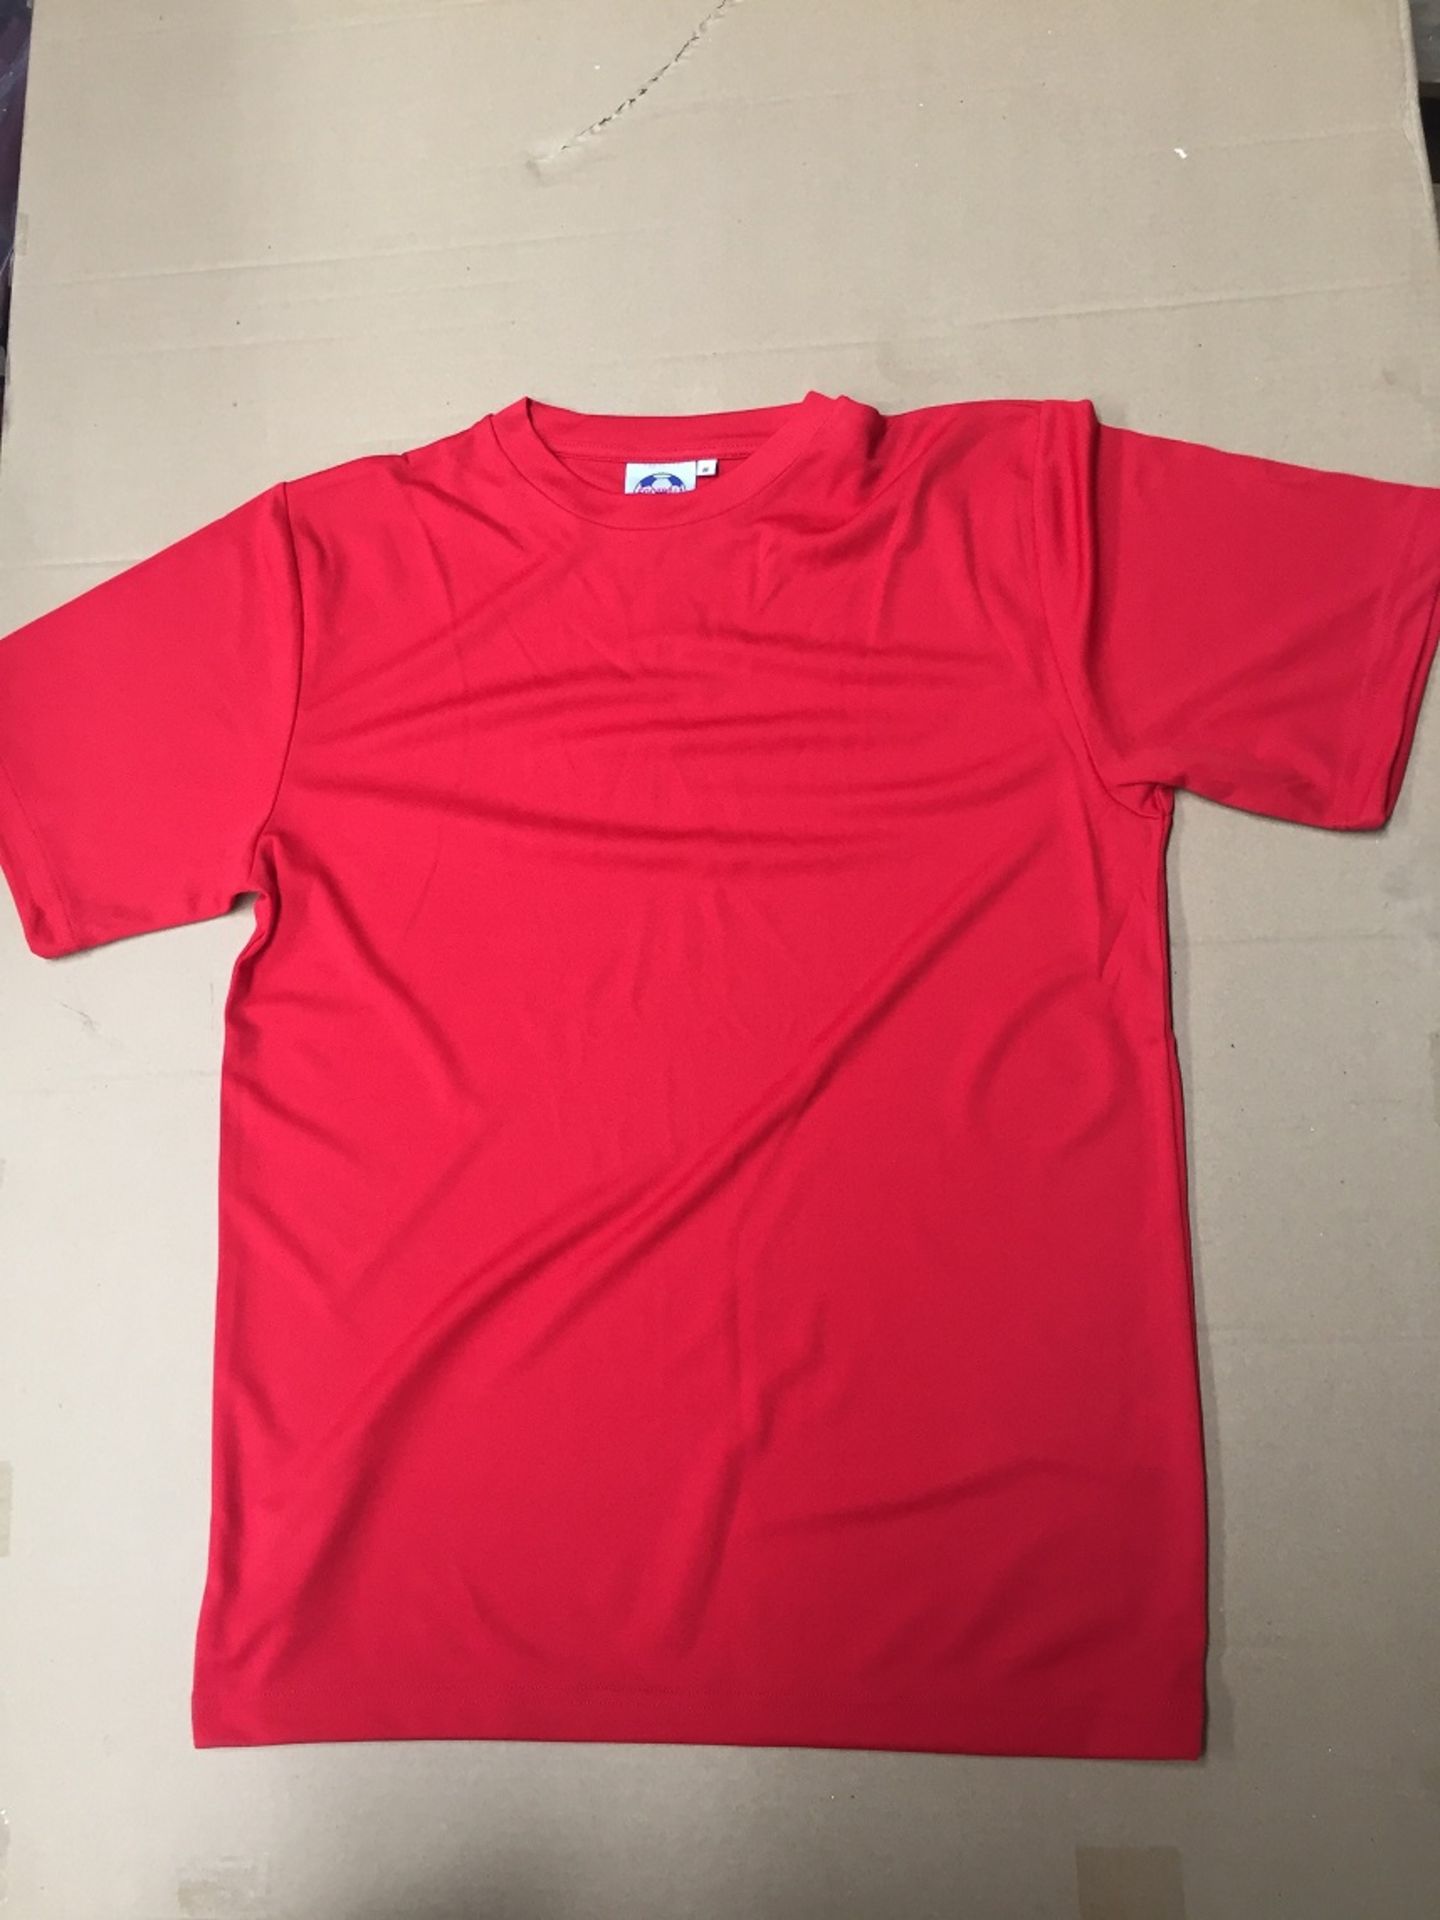 10 X BRAND NEW BAGGED RED PLAIN FOOTBALL TOPS SIZE M